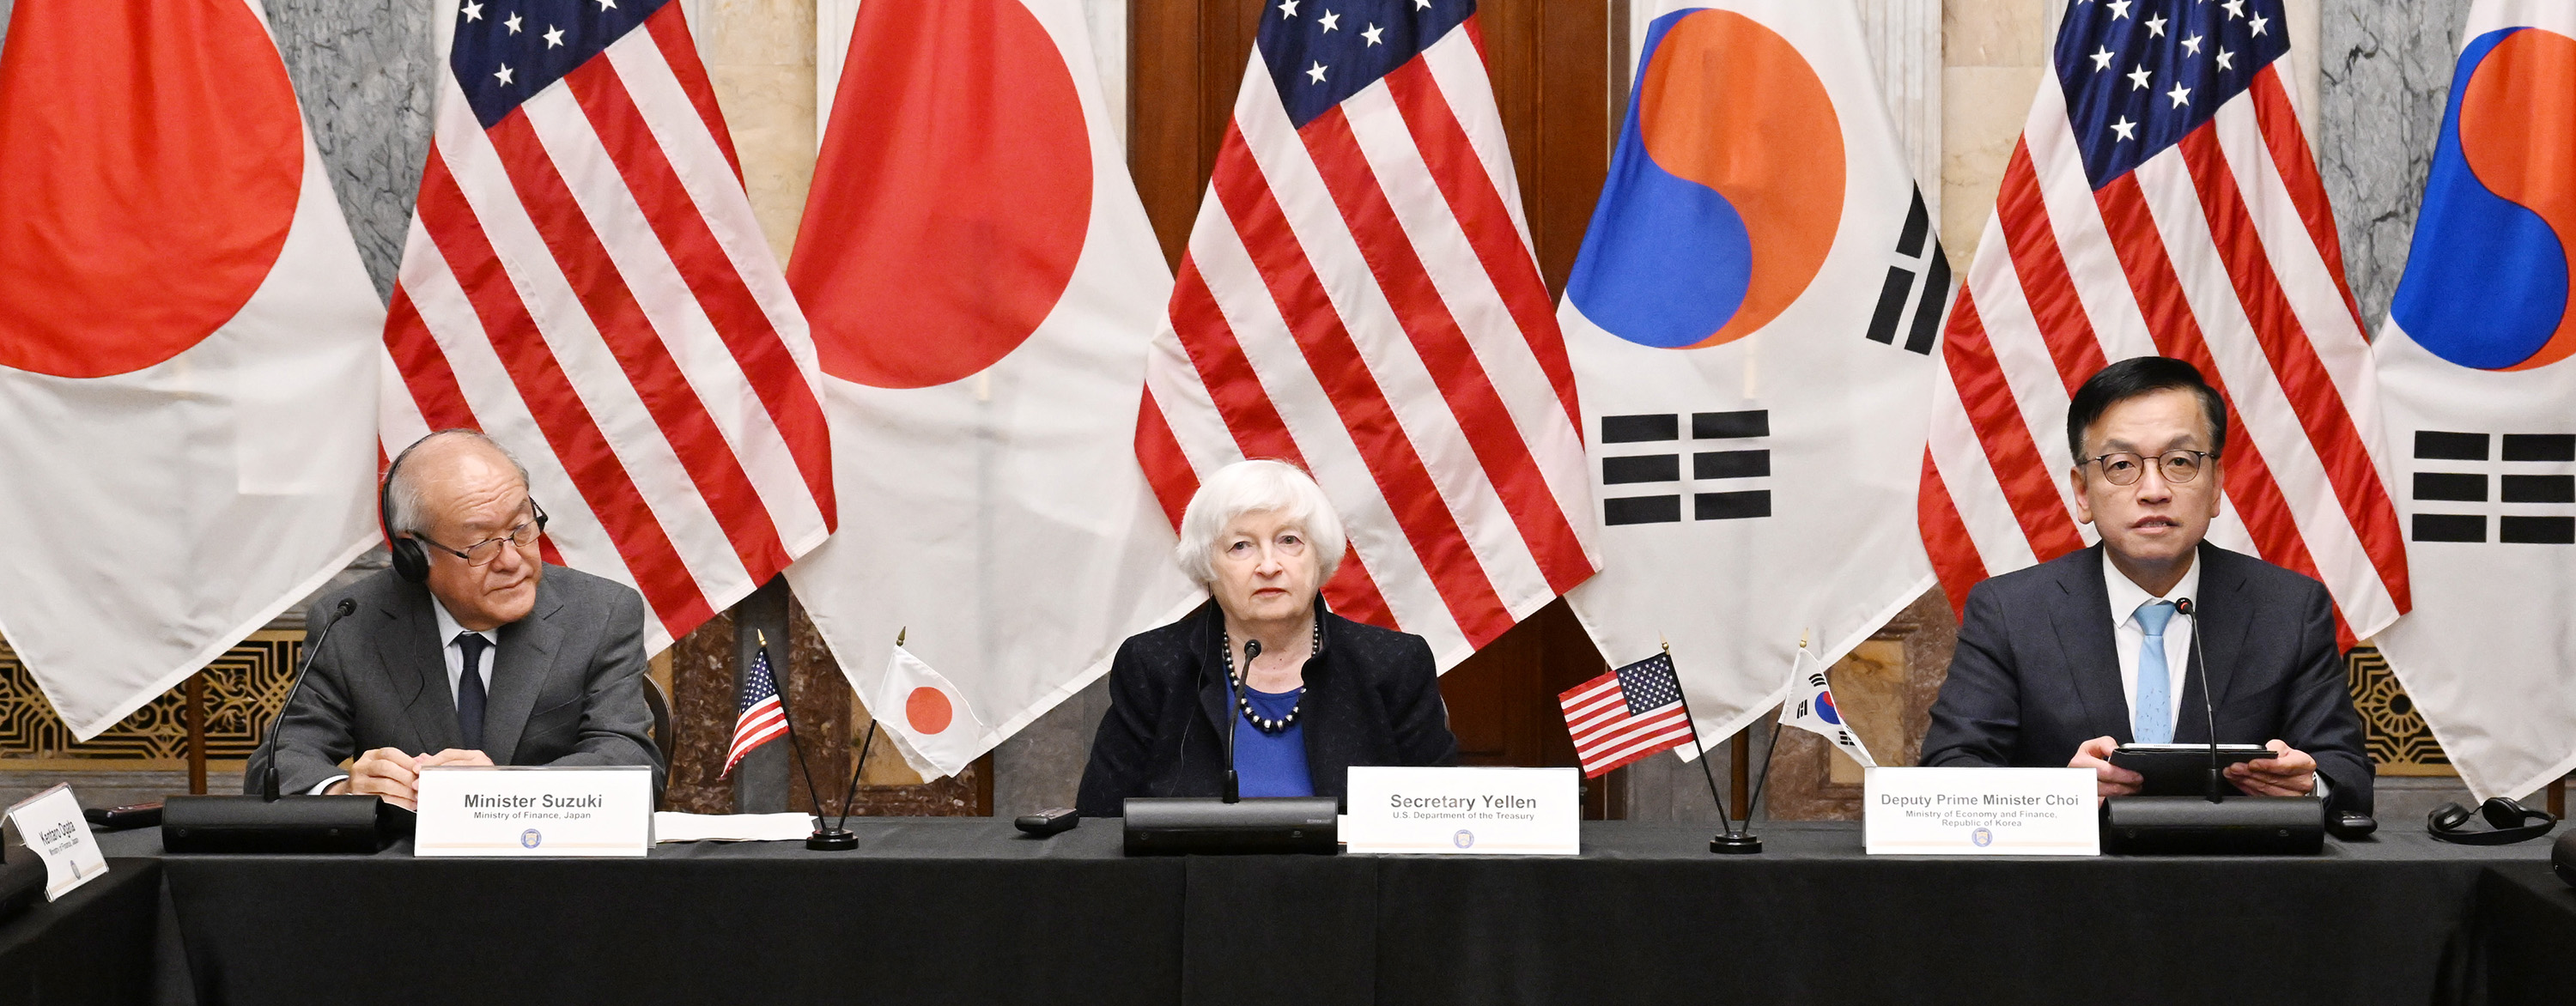 Deputy Prime Minister Choi Sang-mok held the first trilateral meeting with U.S. Treasury Secretary Janet Yellen and Japanese Finance Minister Suzuki Shunichi in Washington, D.C. on April 17.